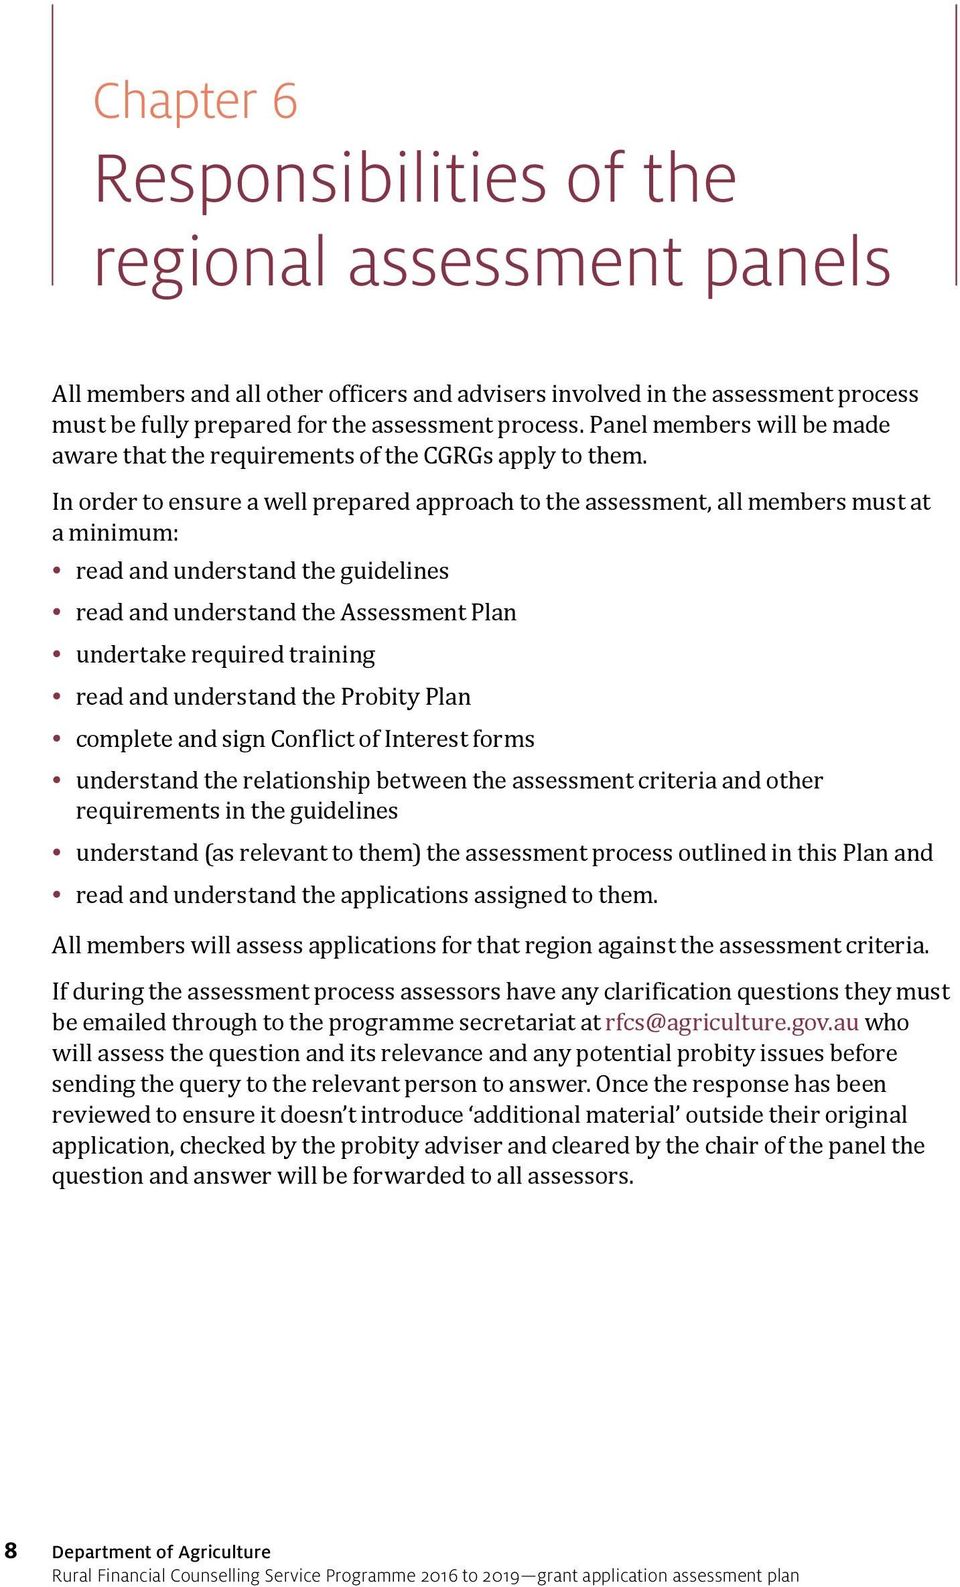 In order to ensure a well prepared approach to the assessment, all members must at a minimum: read and understand the guidelines read and understand the Assessment Plan undertake required training